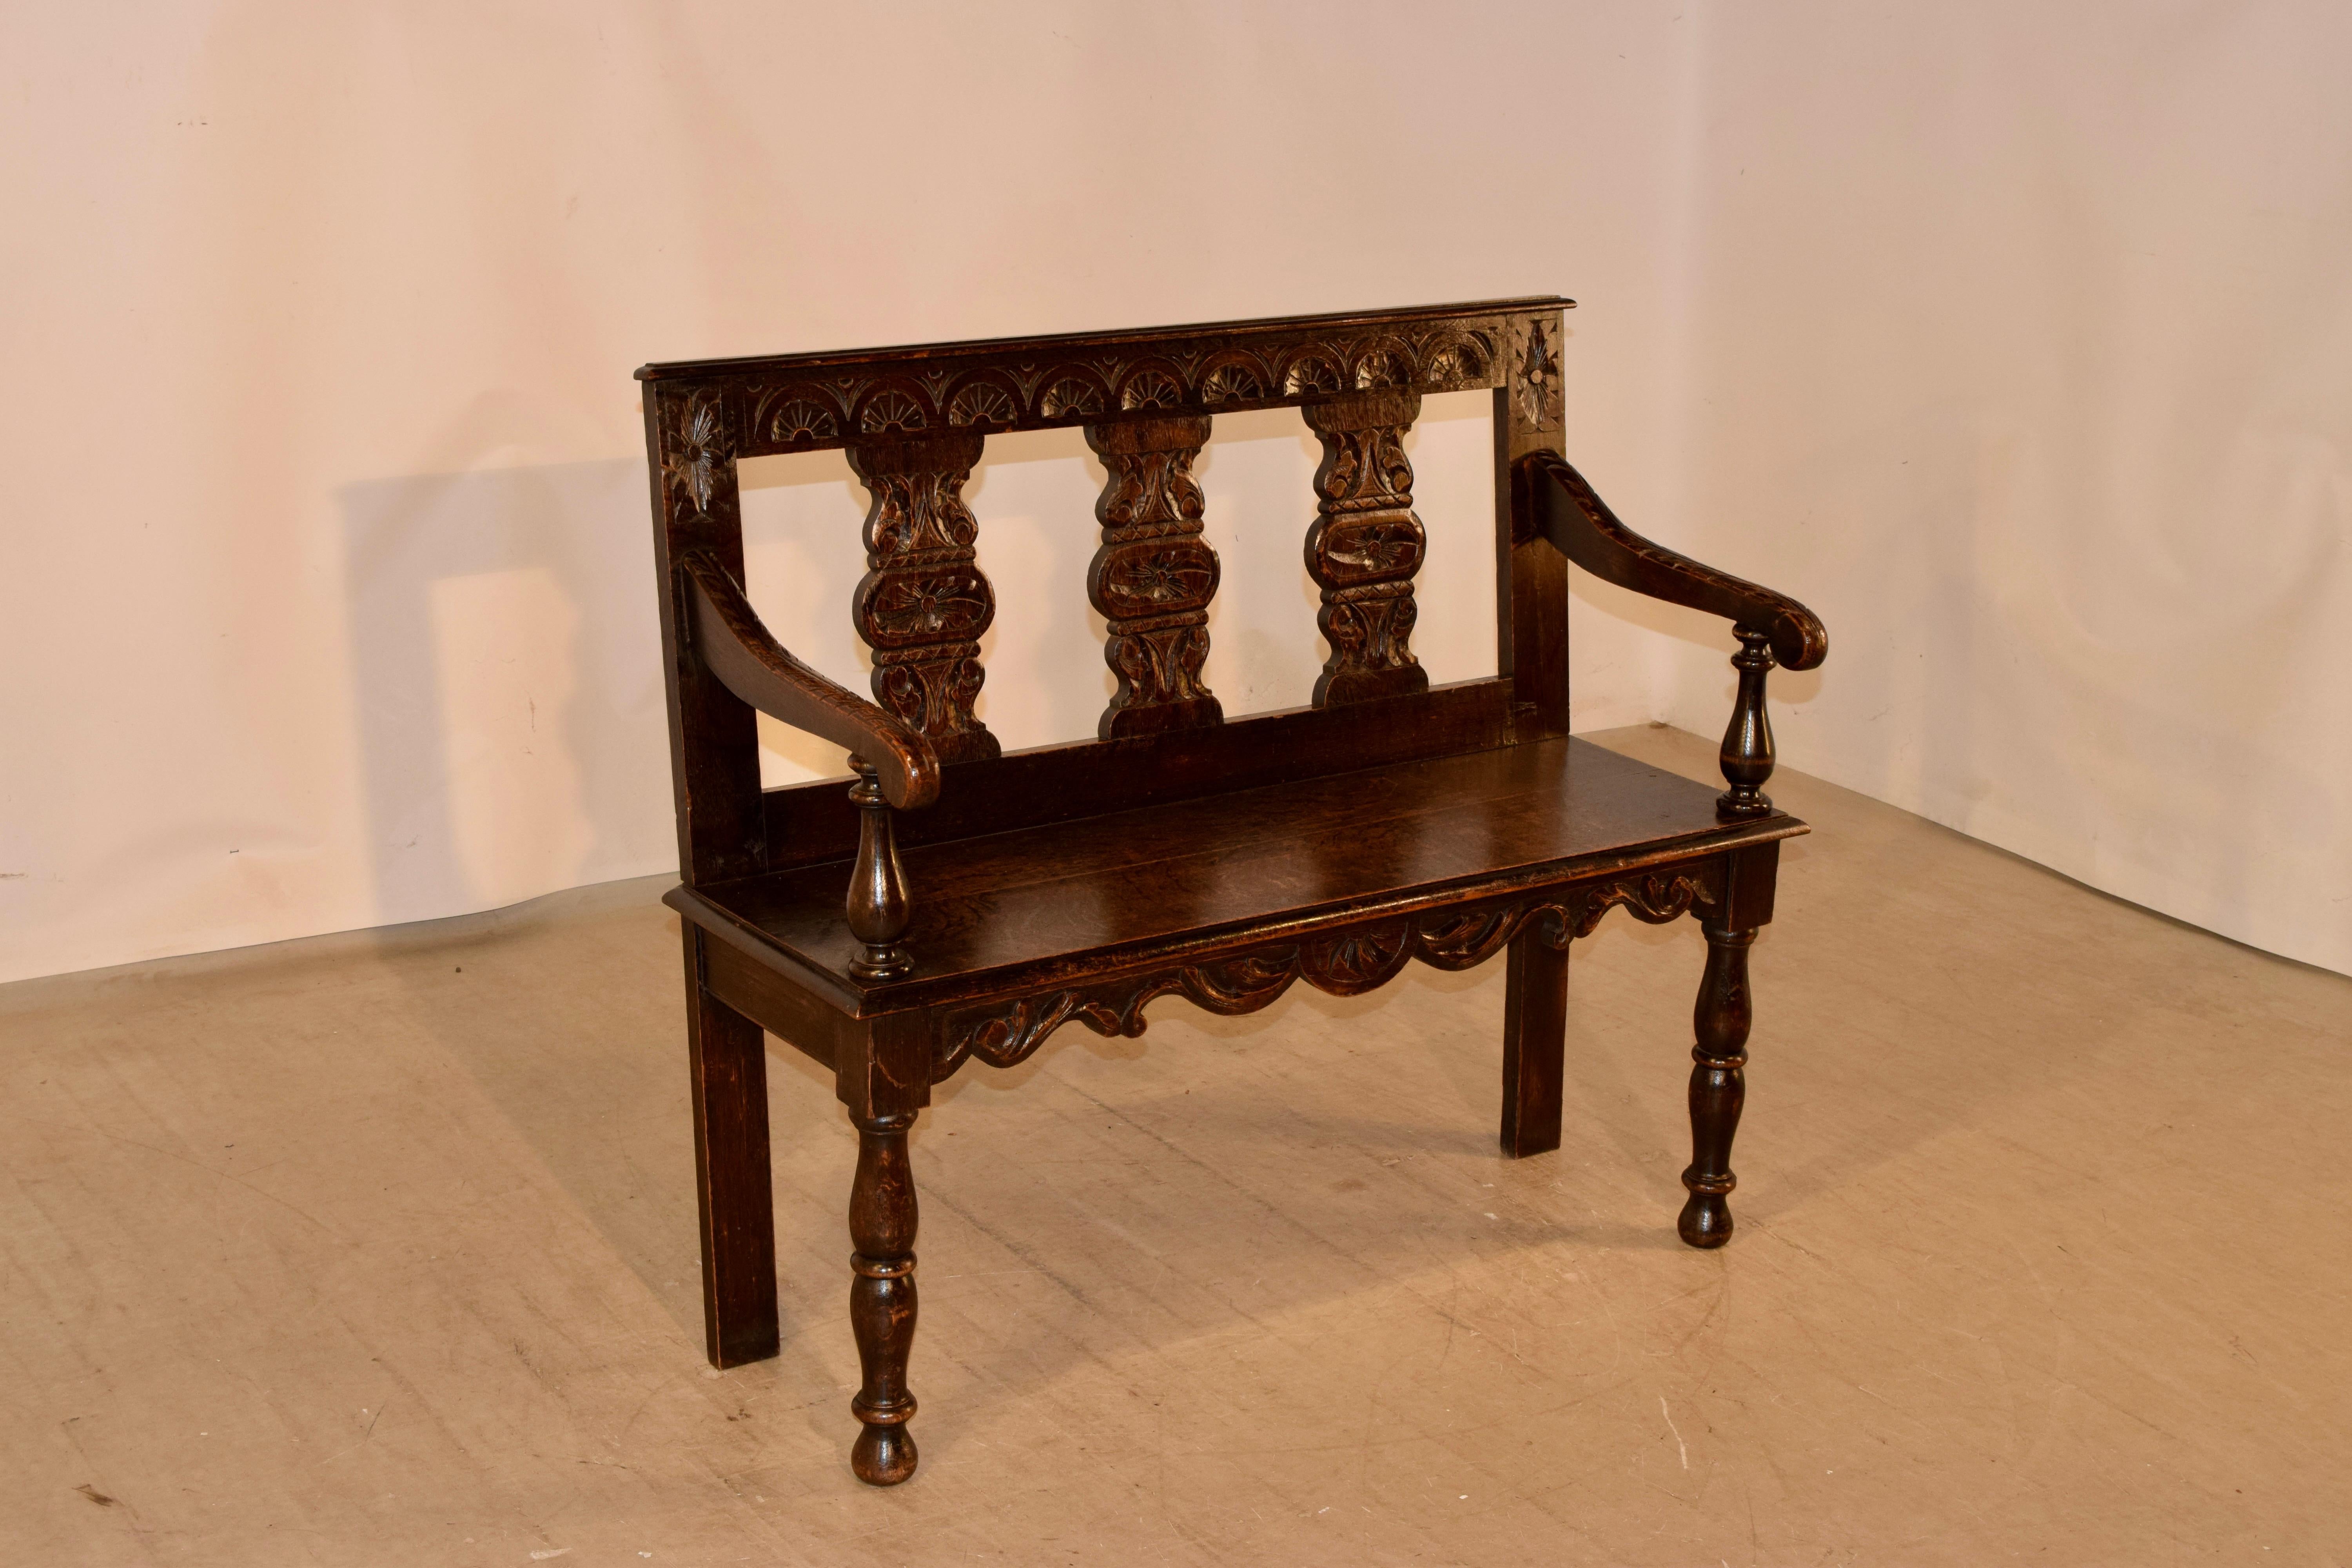 19th century French settee made from oak. The back is carved and has three vase shaped carved panels, following down to a seat with a bevelled edge along the front, and turned arms. The legs are hand-turned in the front and simple in the back for